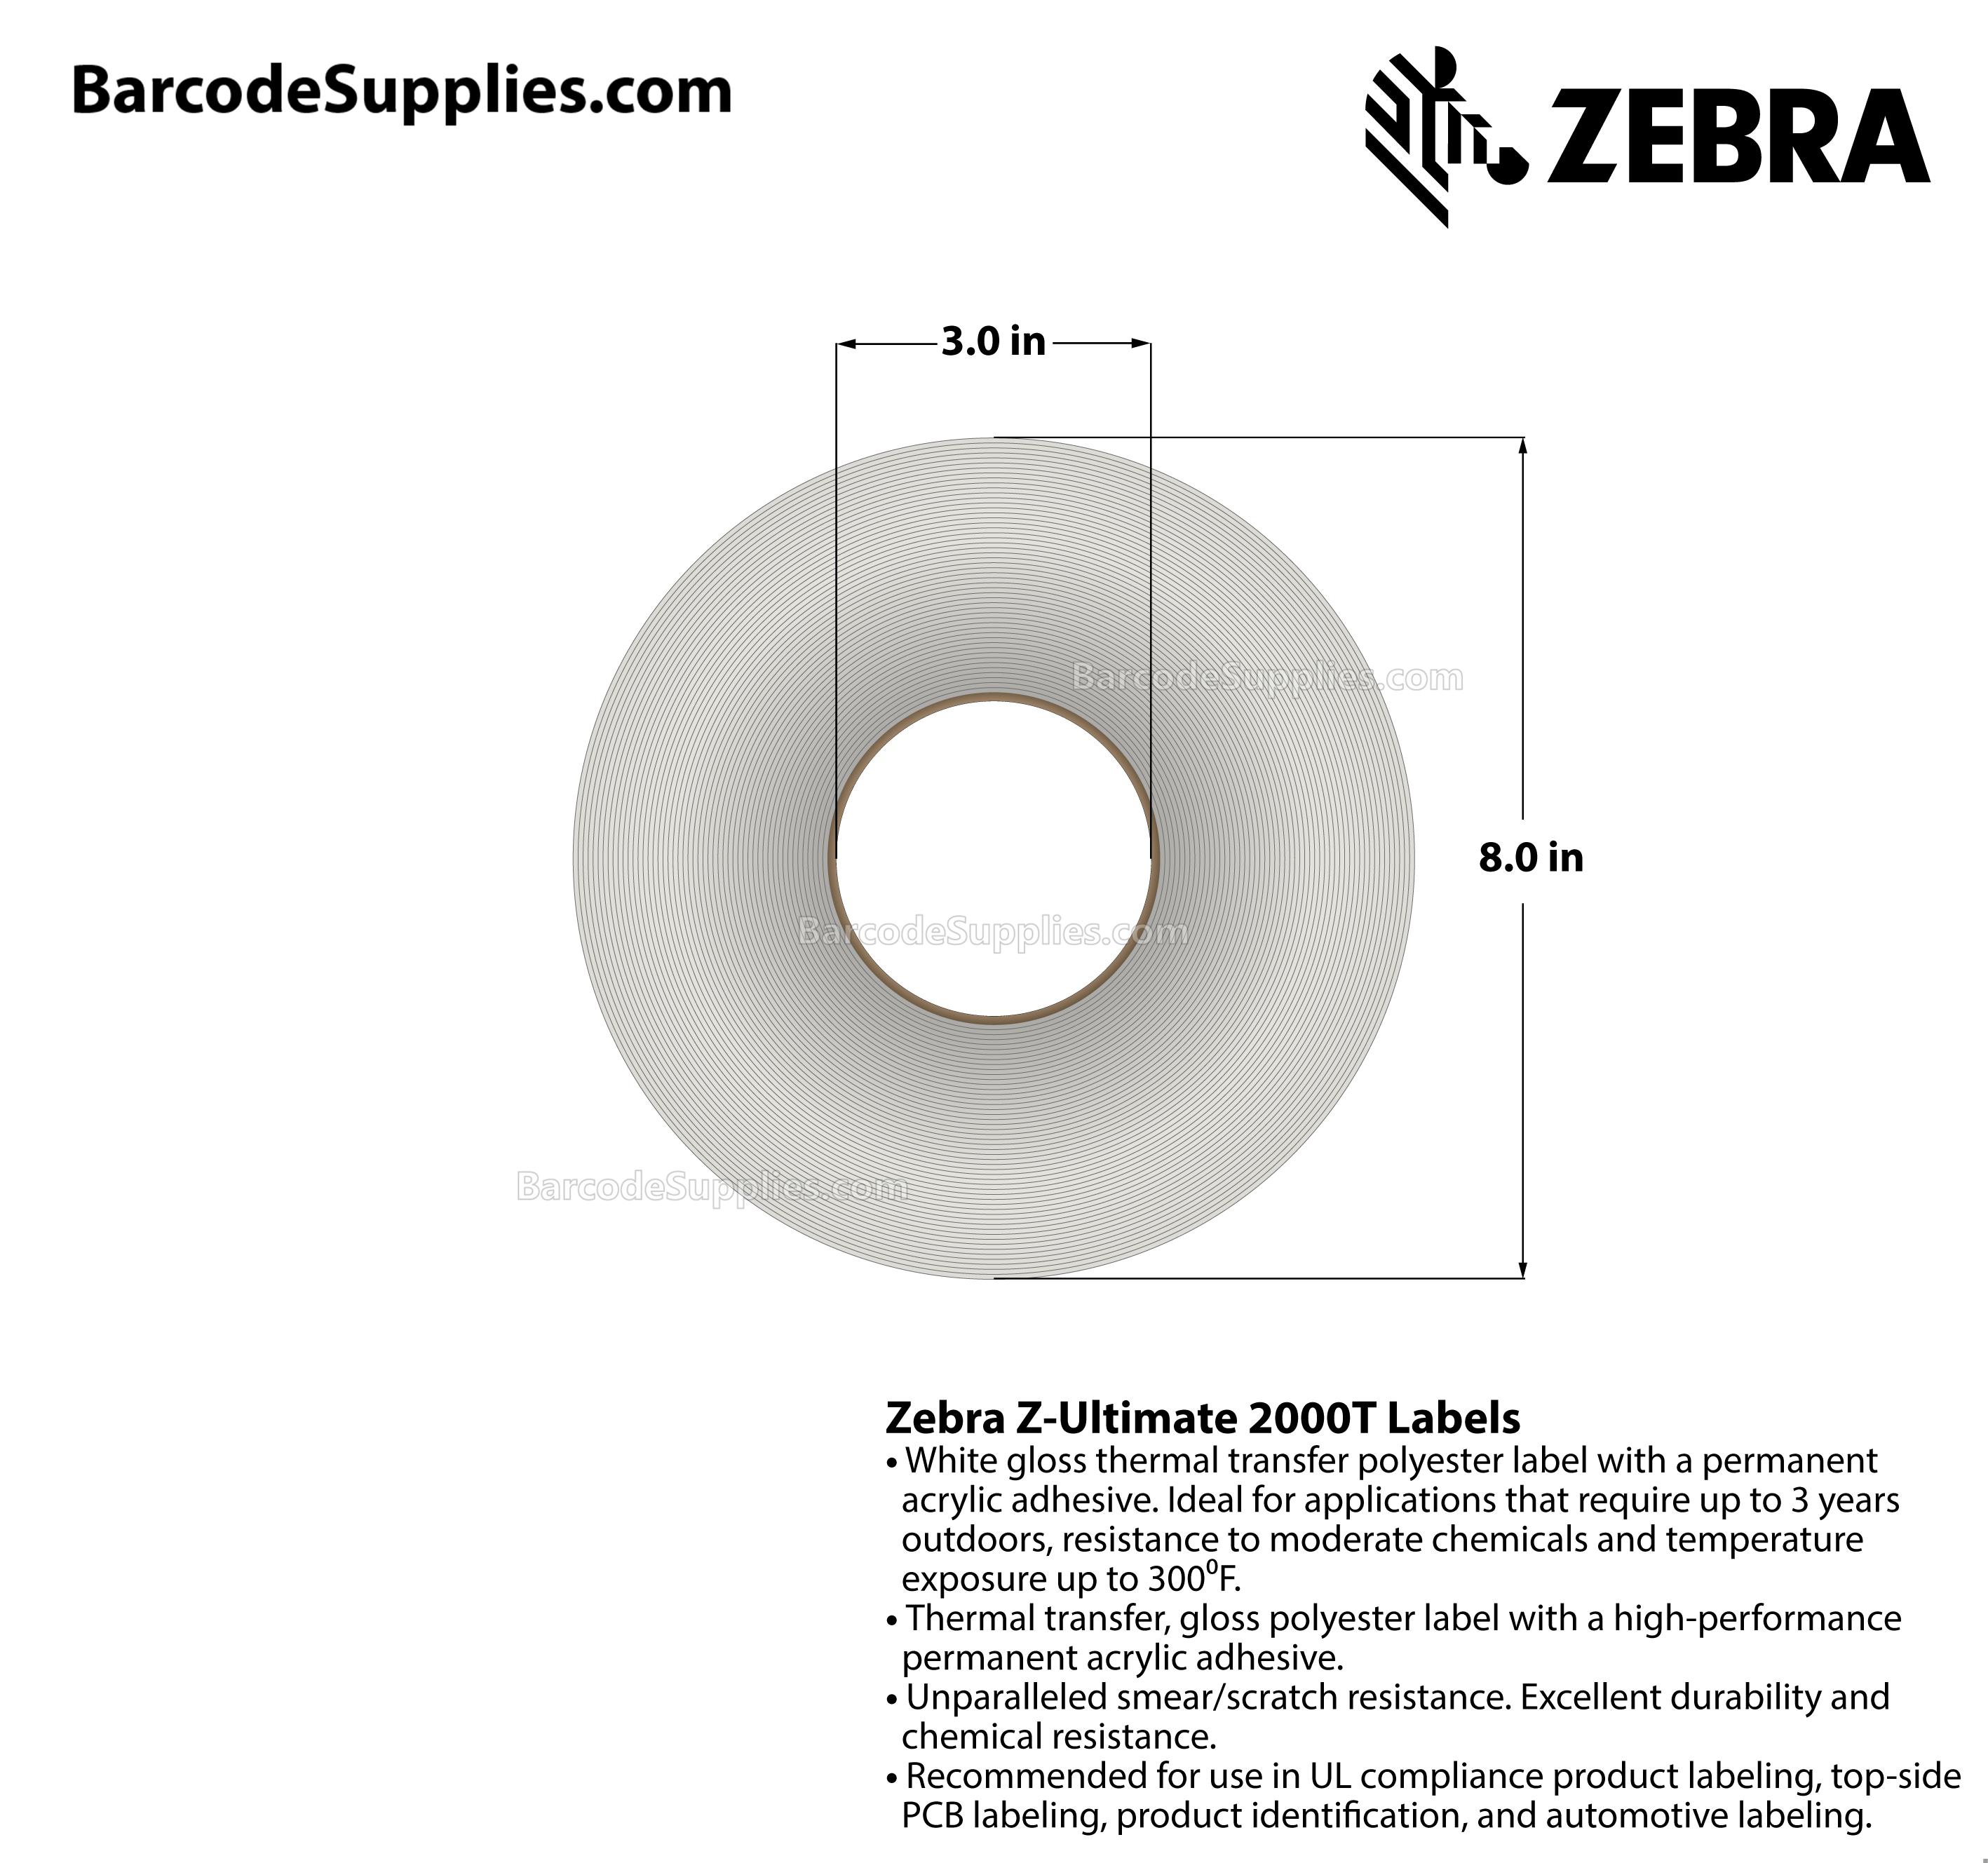 1.25 x 0.25 Thermal Transfer White Z-Ultimate 2000T Labels With Permanent Adhesive - Perforated - 10000 Labels Per Roll - Carton Of 1 Rolls - 10000 Labels Total - MPN: 10022985